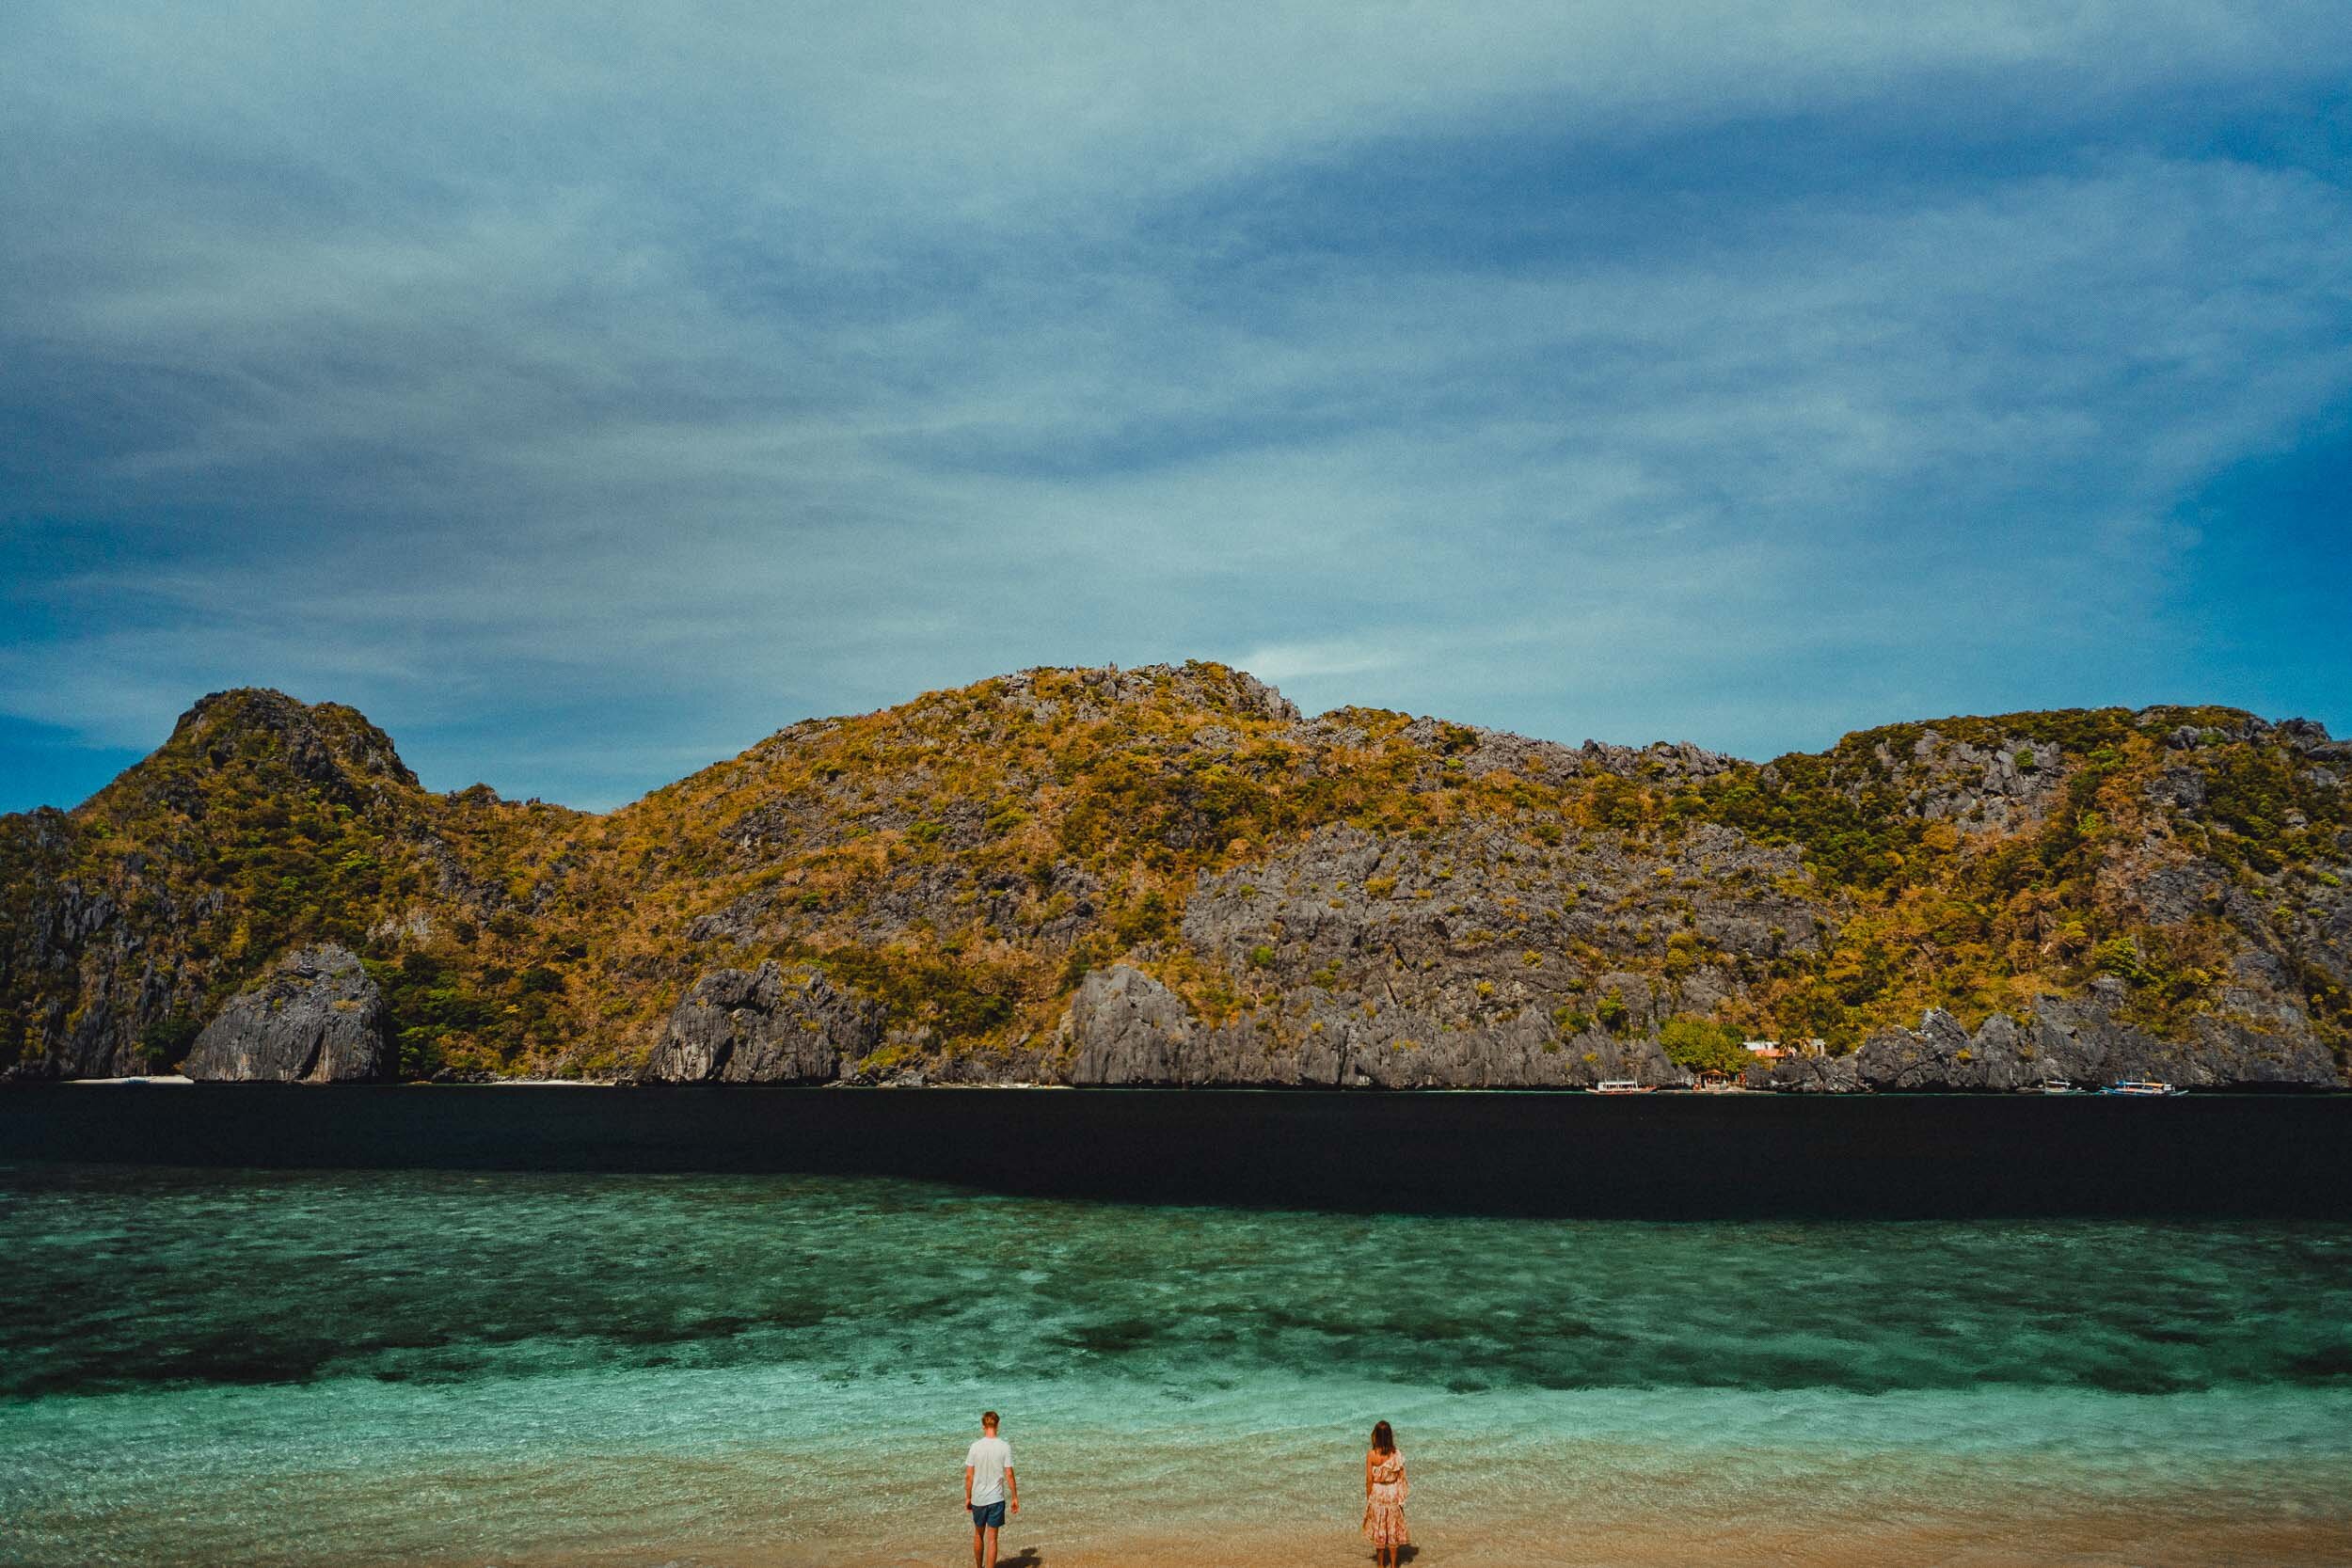 11 El Nido Philippines Couple Photography Honeymoon portraits in Palawan, March 2020. Travel couple photography in Southeast Asia x @hejguj.jpg